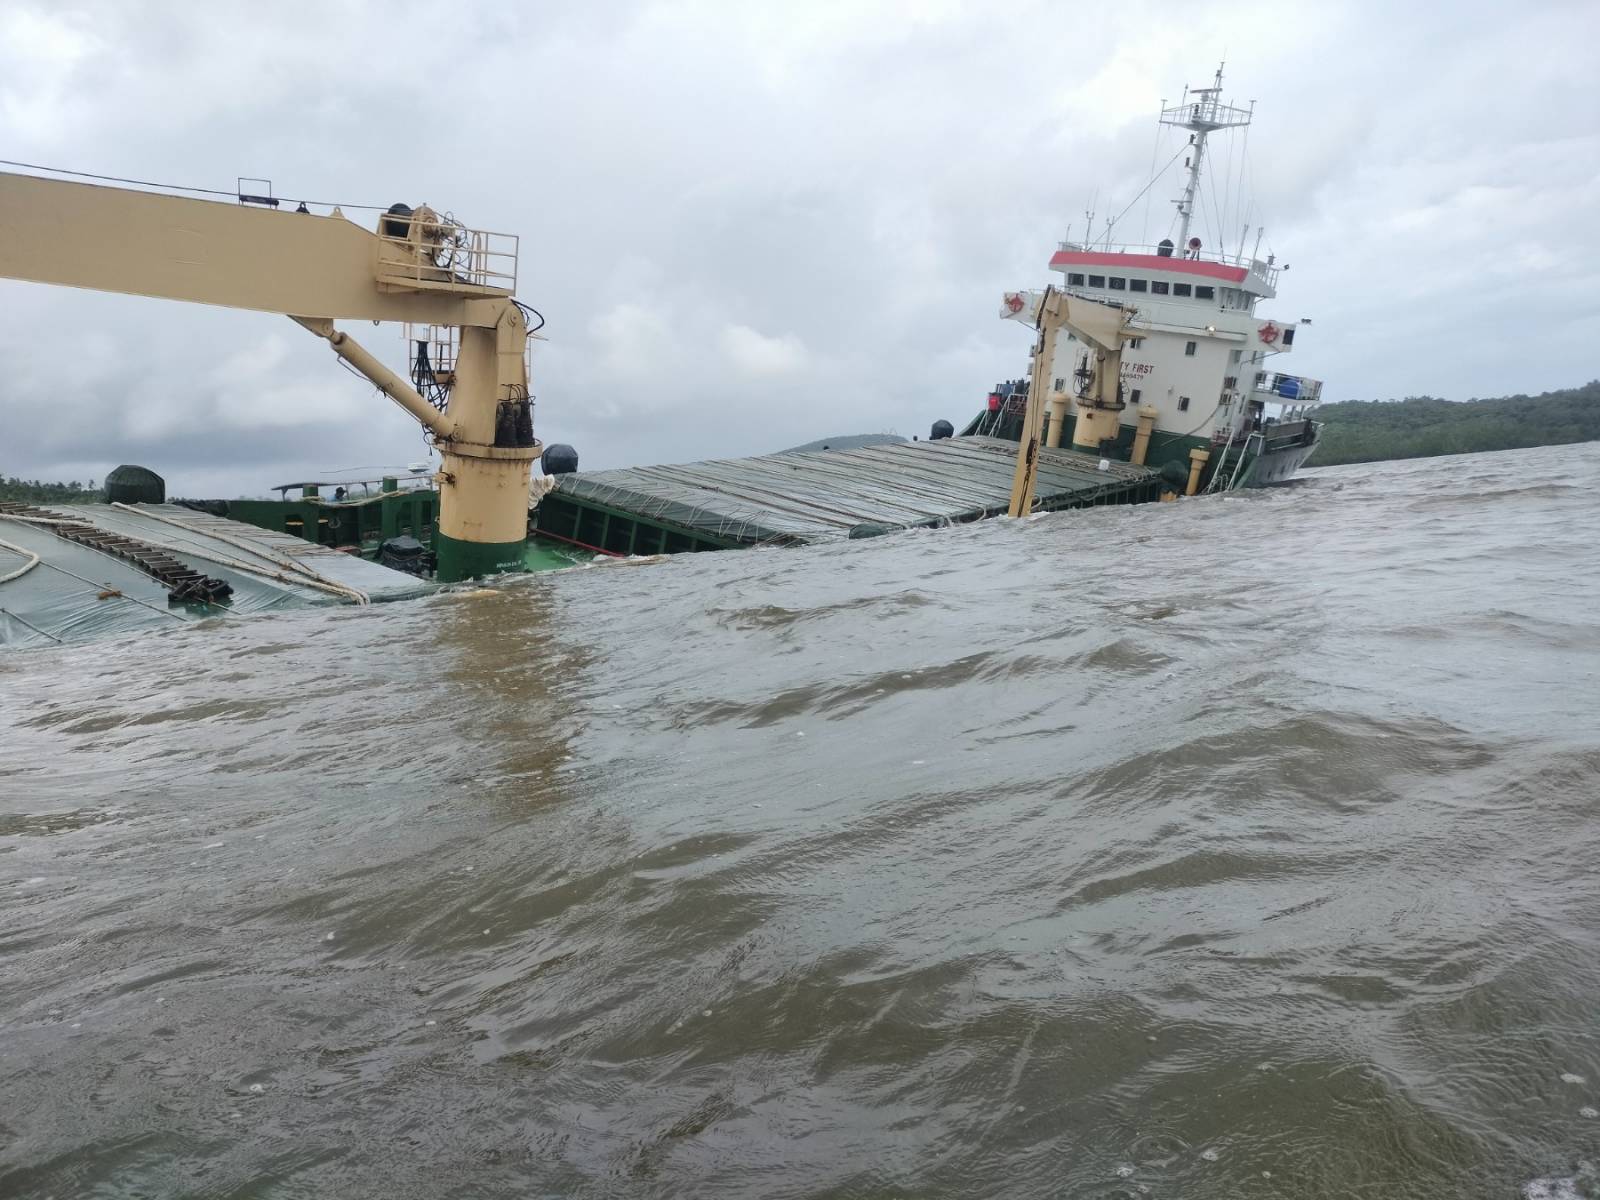 A cargo vessel from Vietnam ran aground in the waters off Balabac town in Palawan province on Tuesday night, the Balabac Municipal Disaster Risk and Reduction Management (MDRRM) Office said Wednesday, Nov. 22.